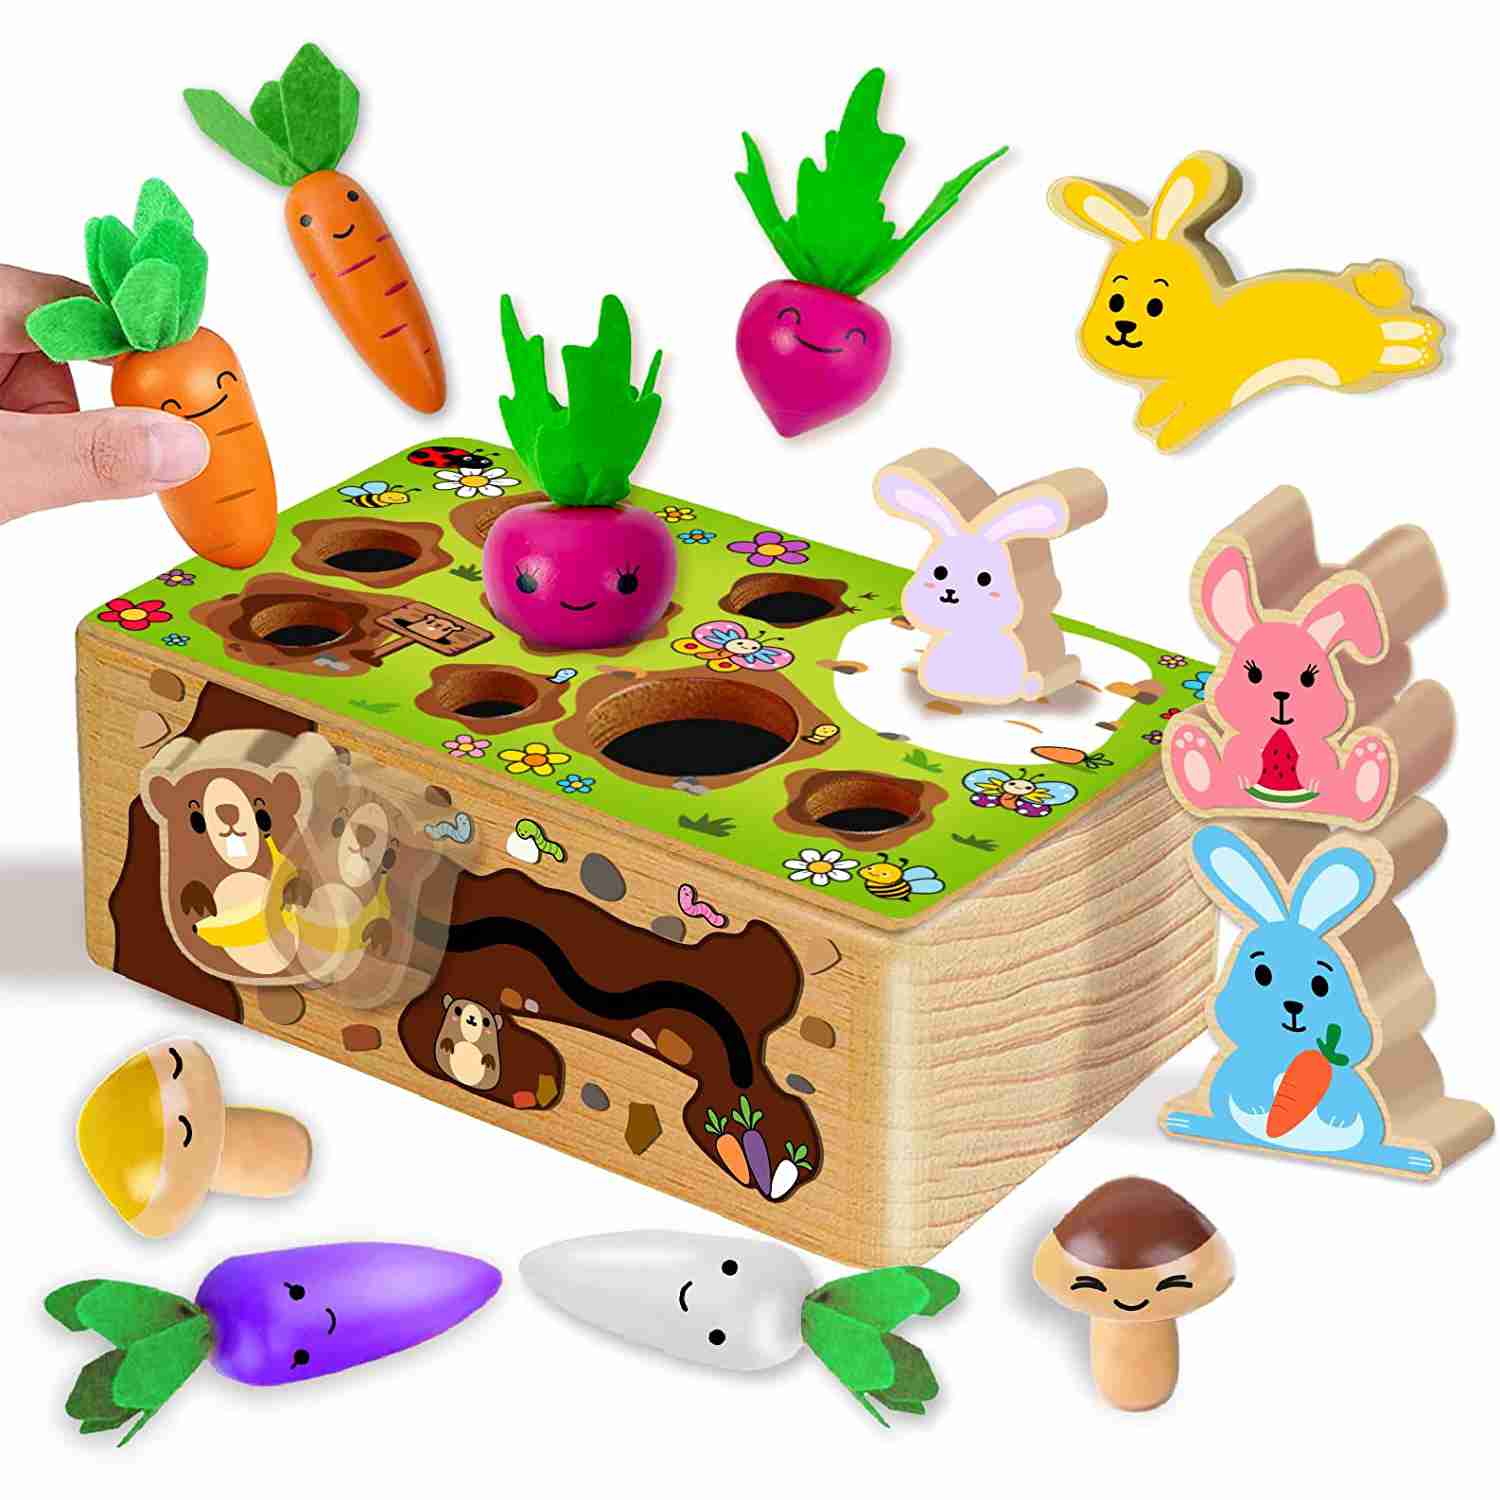 montessori-wooden-toy with cash back rebate